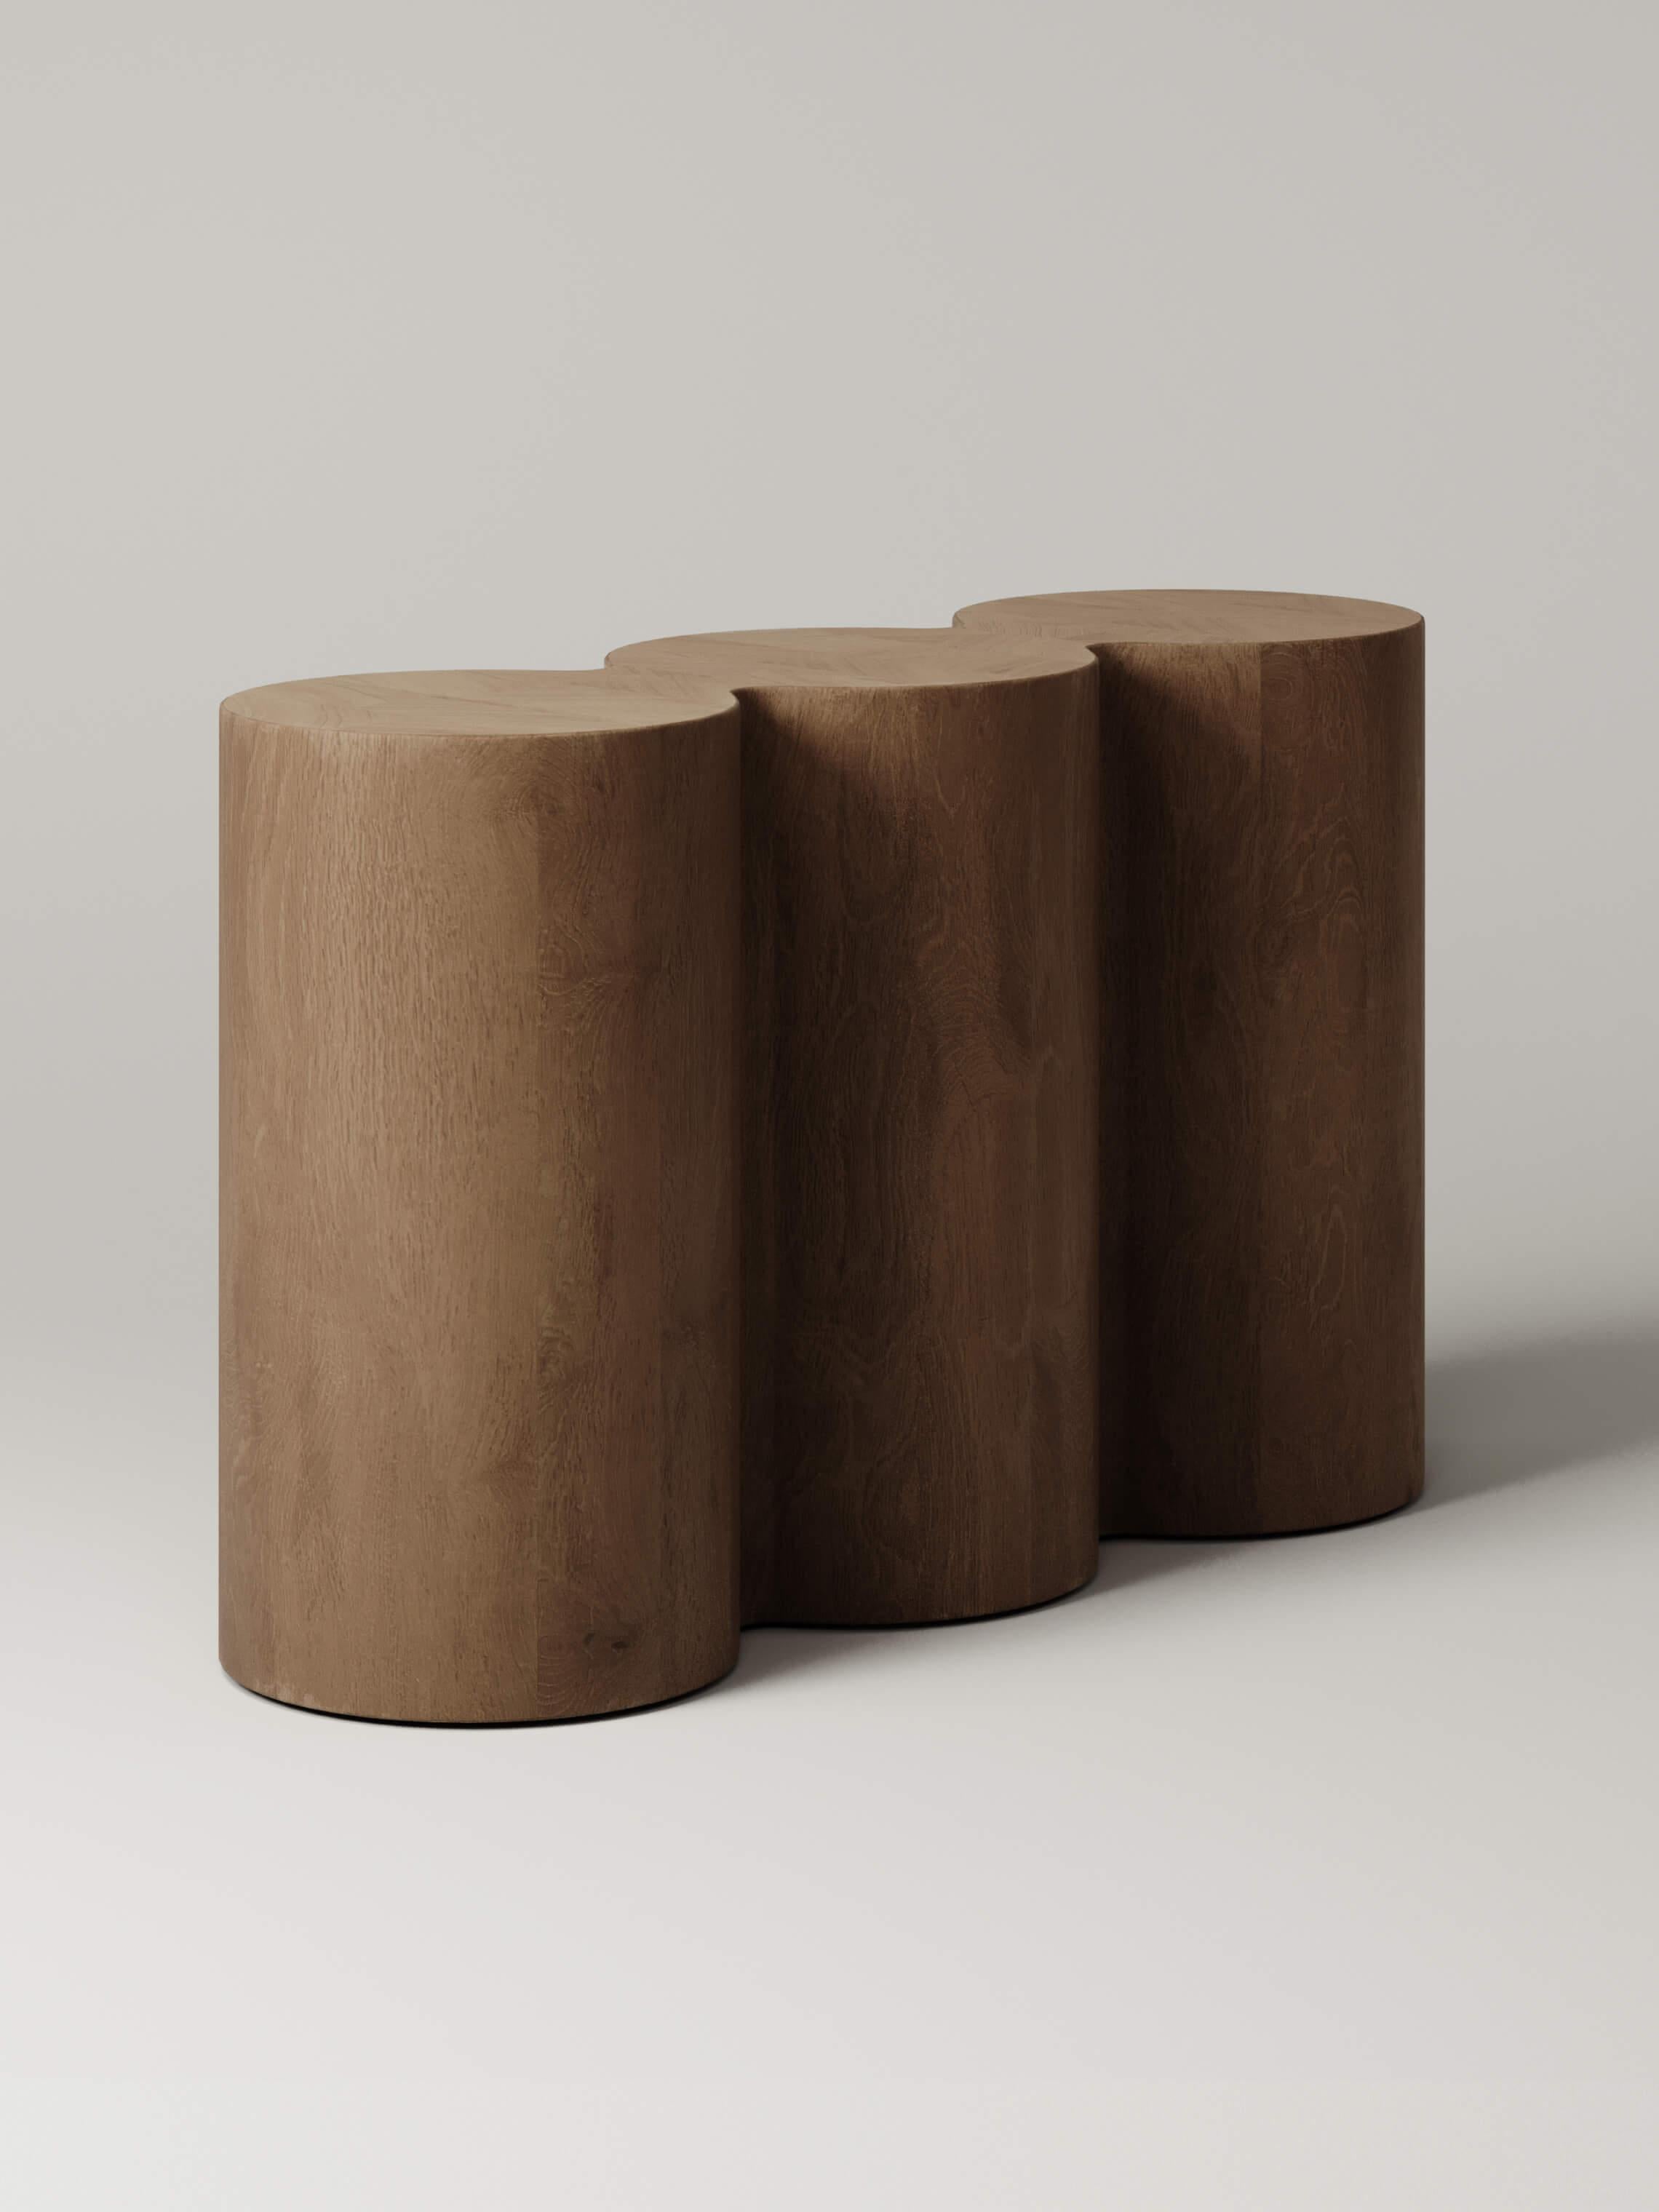 M_008 White Oak Console by Monolith Studio
Signed and Numbered.
Dimensions: D 35,5 x W 104 x H 81 cm.
Materials: White oak.

Available in travertine, walnut, white oak and lava rock.  Please contact us. 

Monolith, founded in 2022 by Marc Personick,